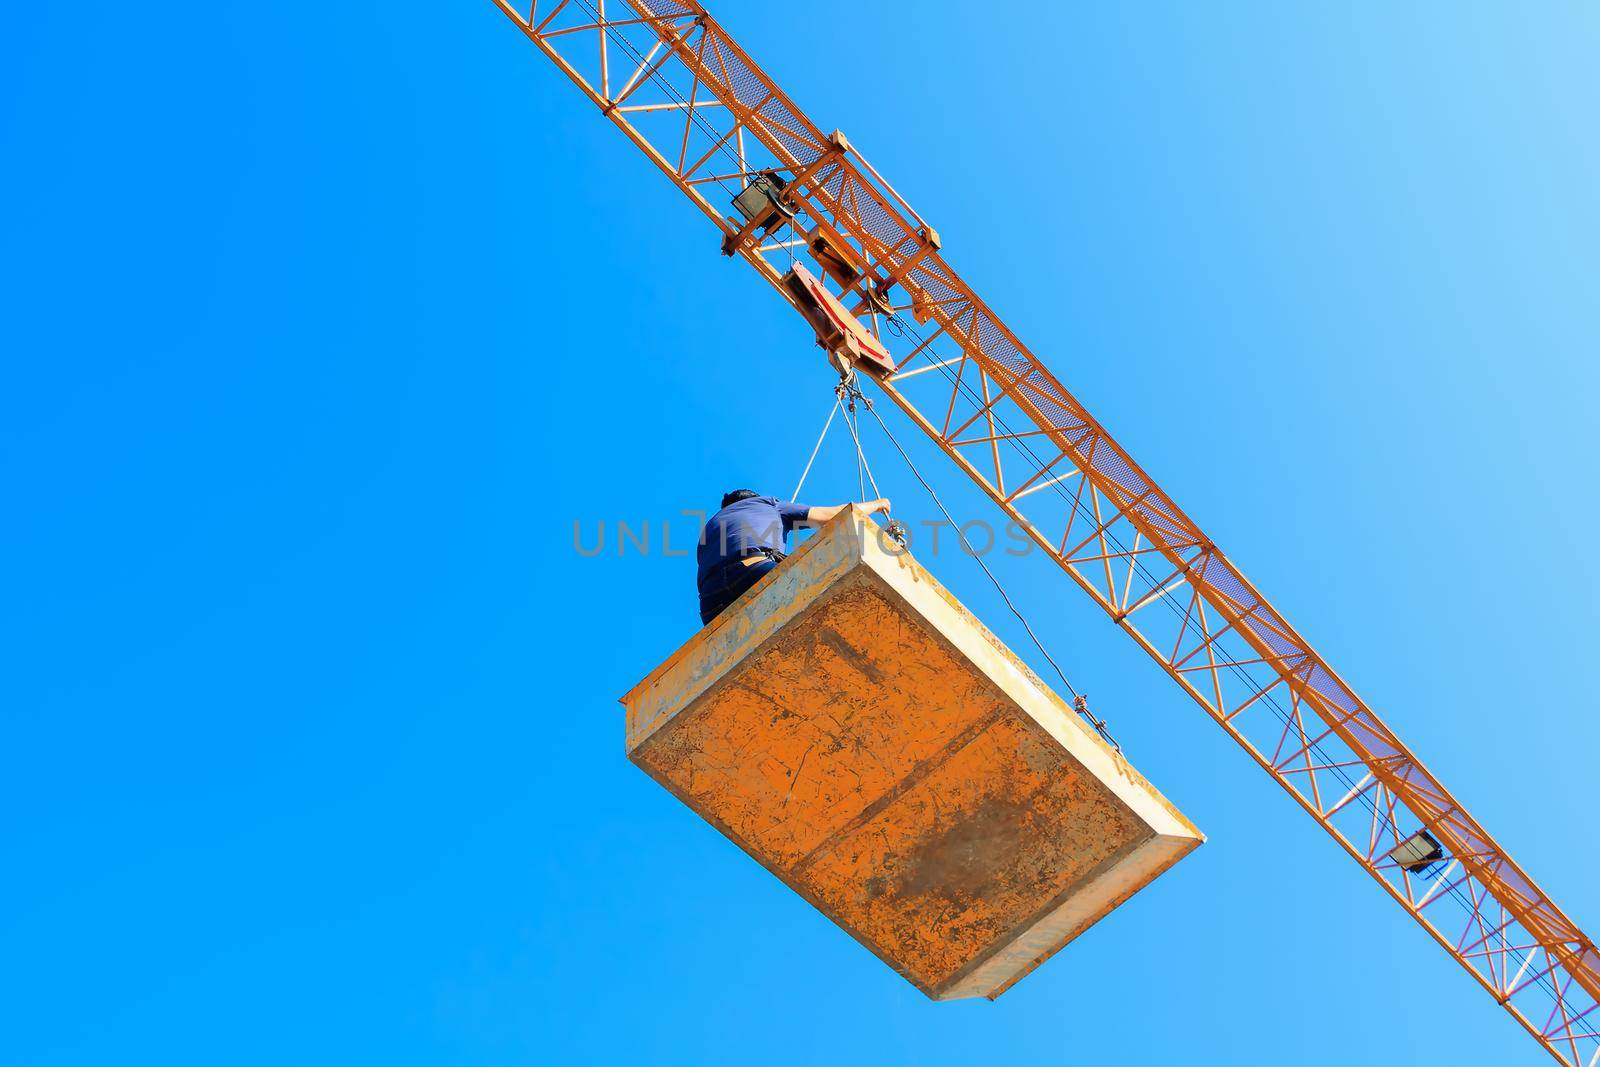 male in bucket of Tower crane. building construction site. blue sky background